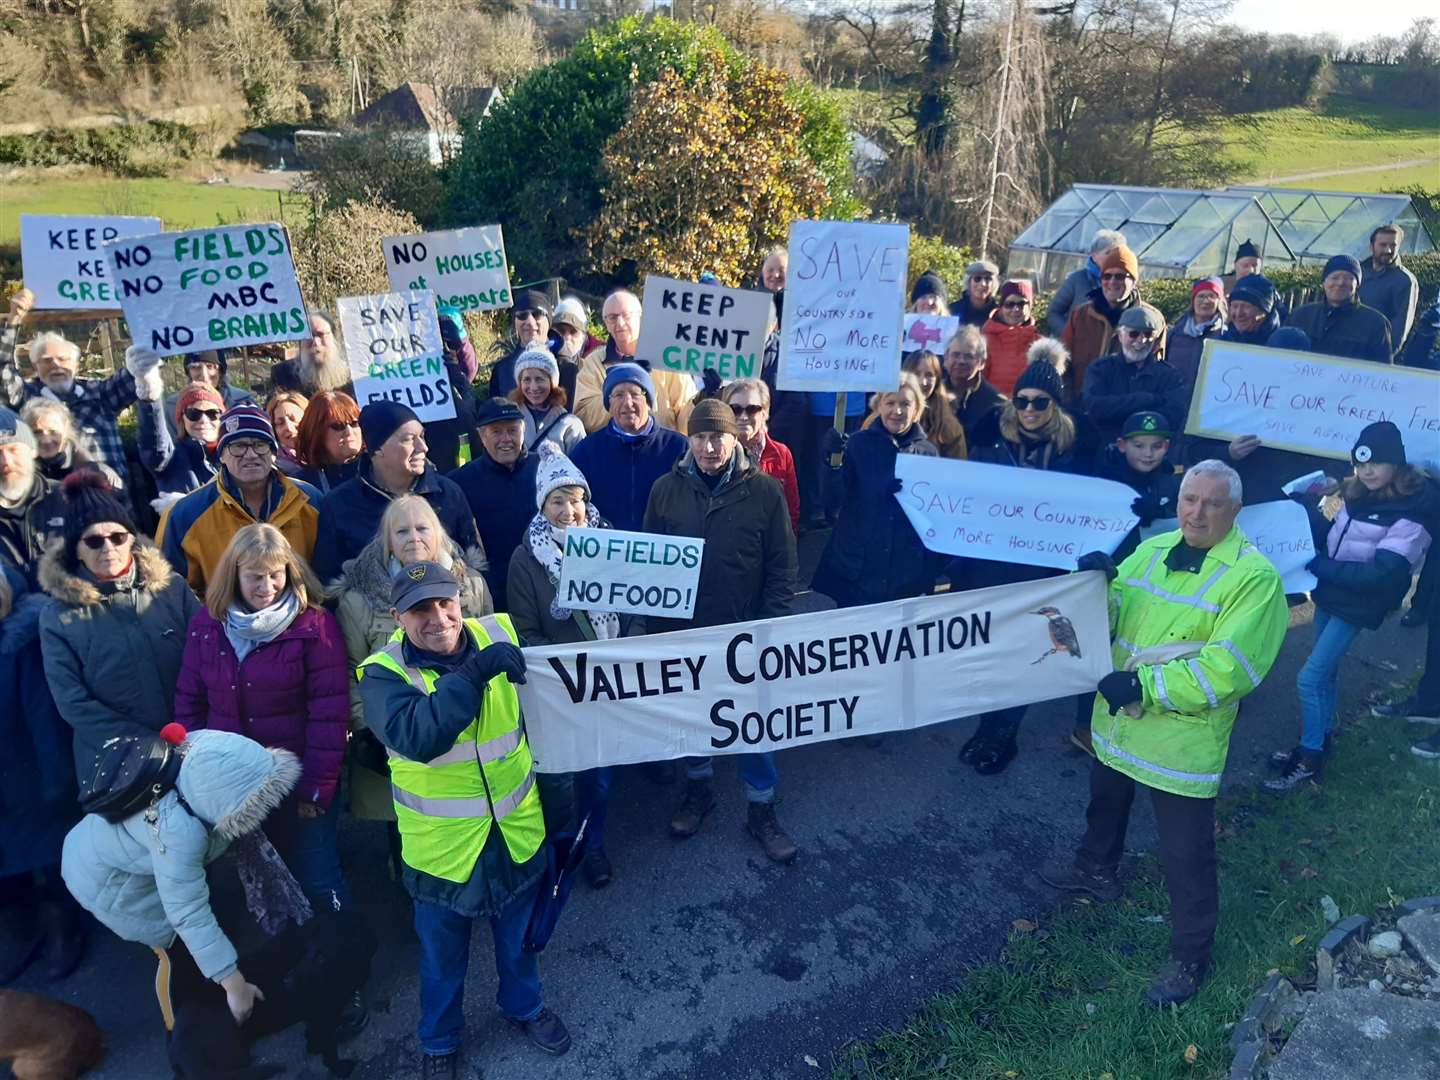 Members of the Valley Conservation Society joined the Day of Action to Save Kent's Green Spaces